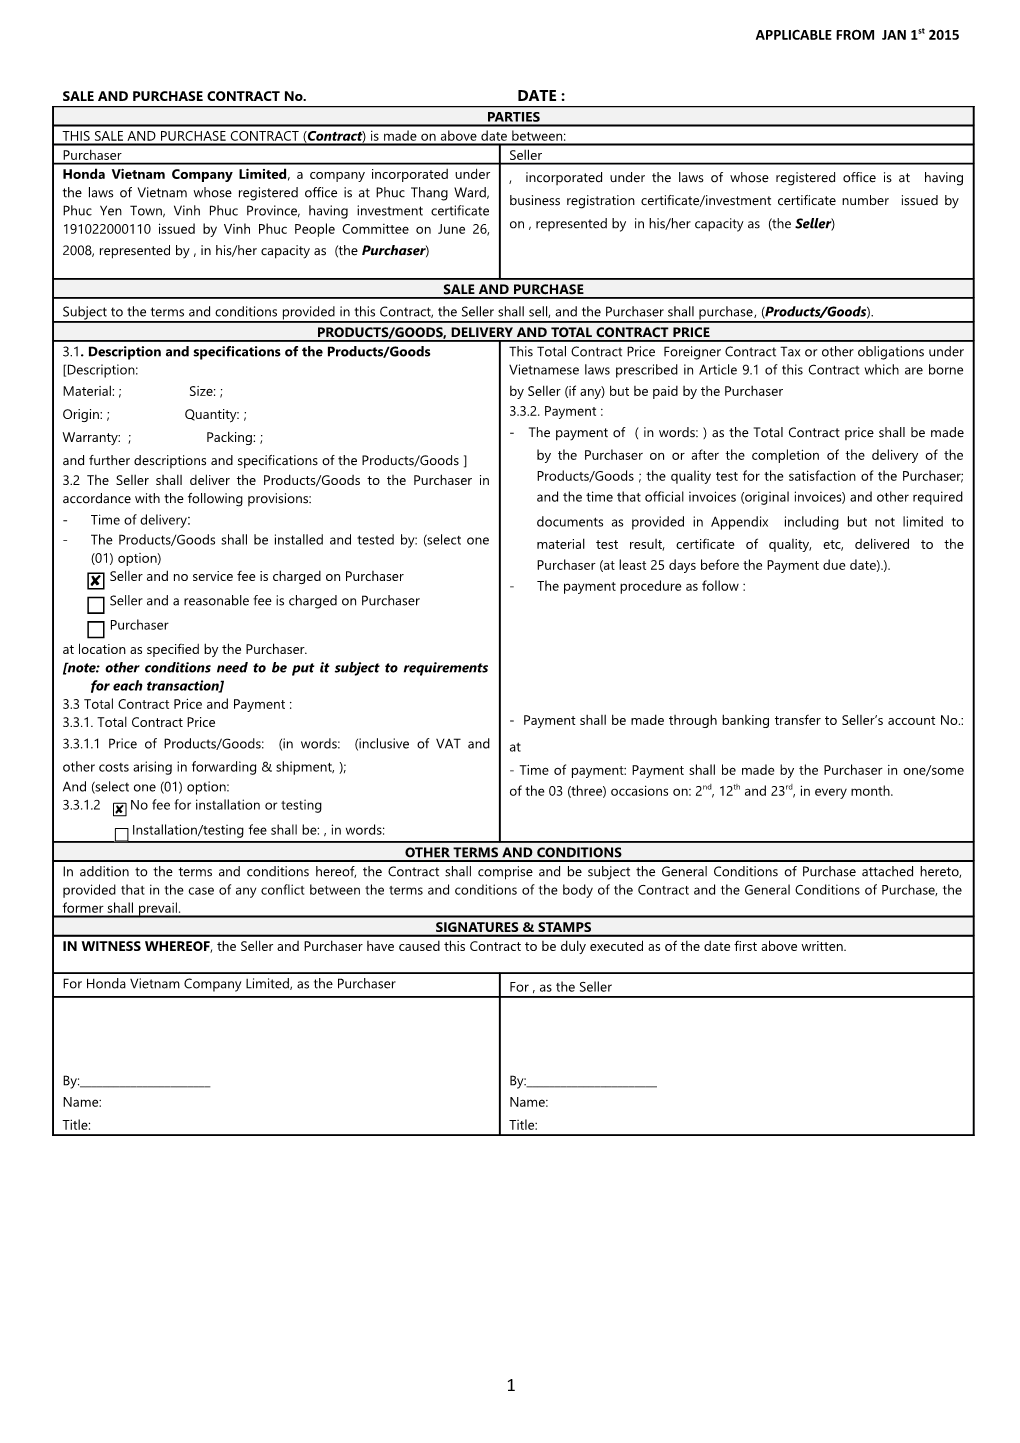 Sale/Purchase Contract Form